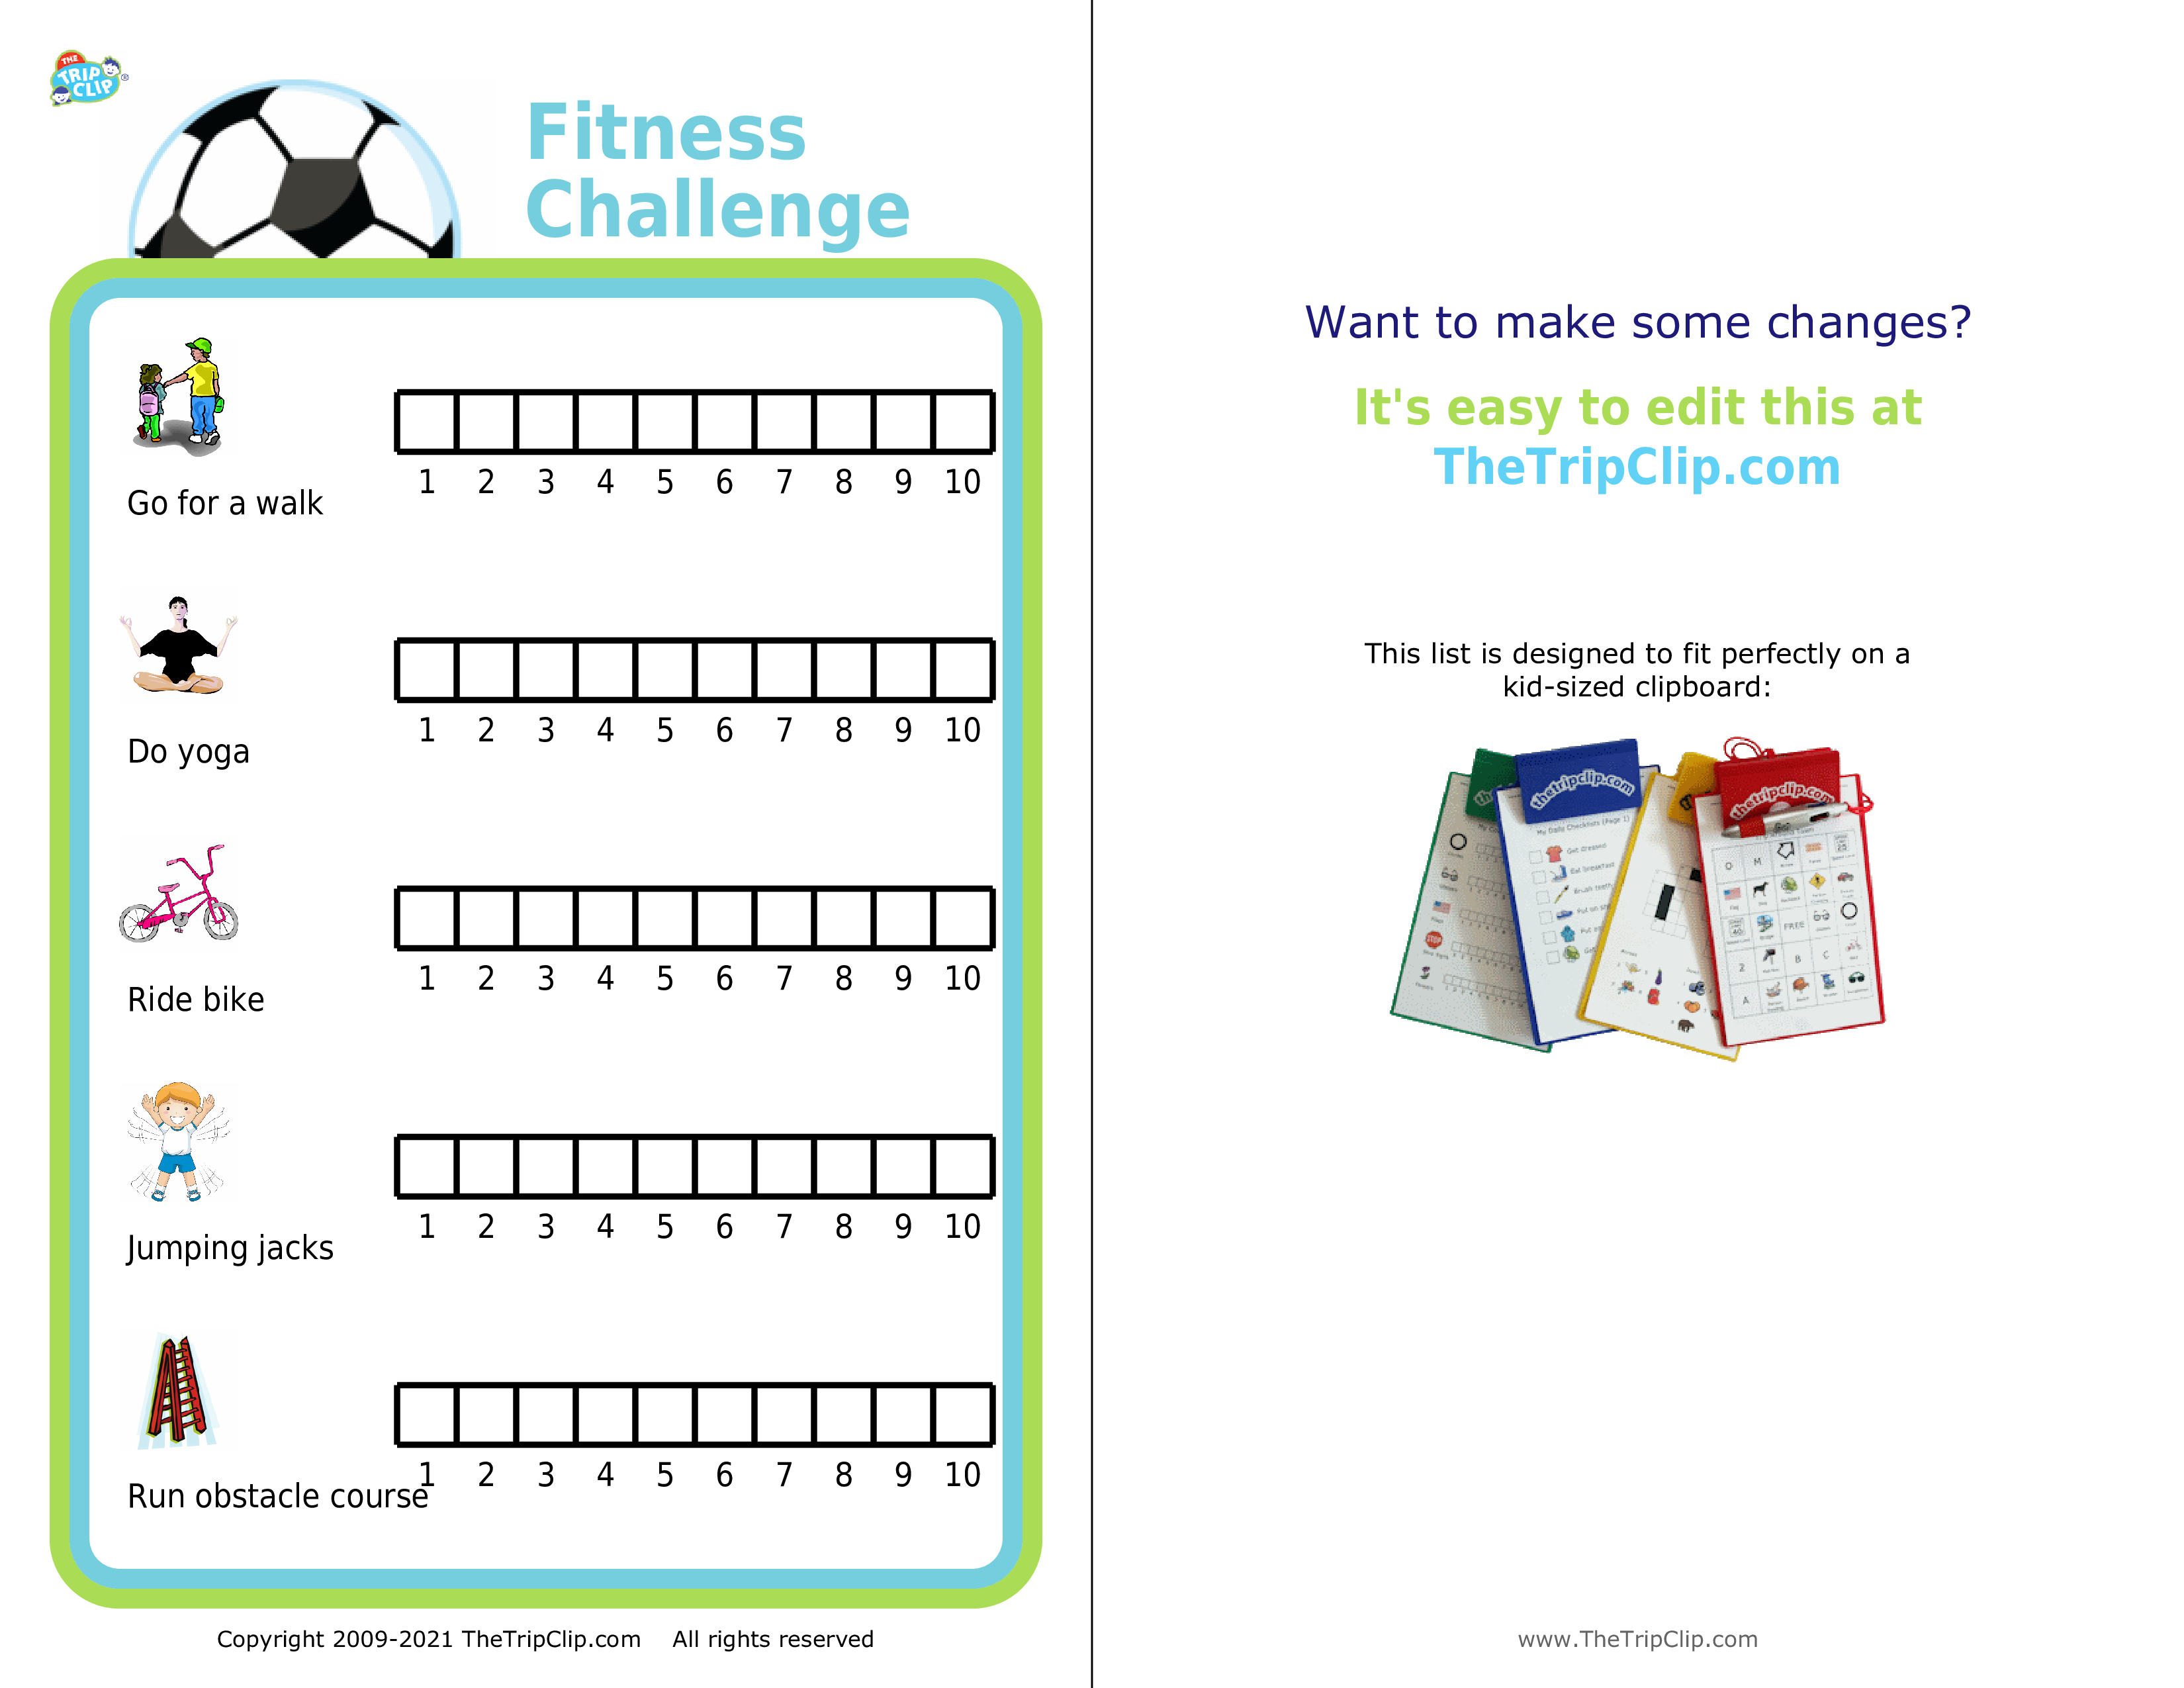 Fitness challenge printable lets you fill in a box each time you do a particular activity